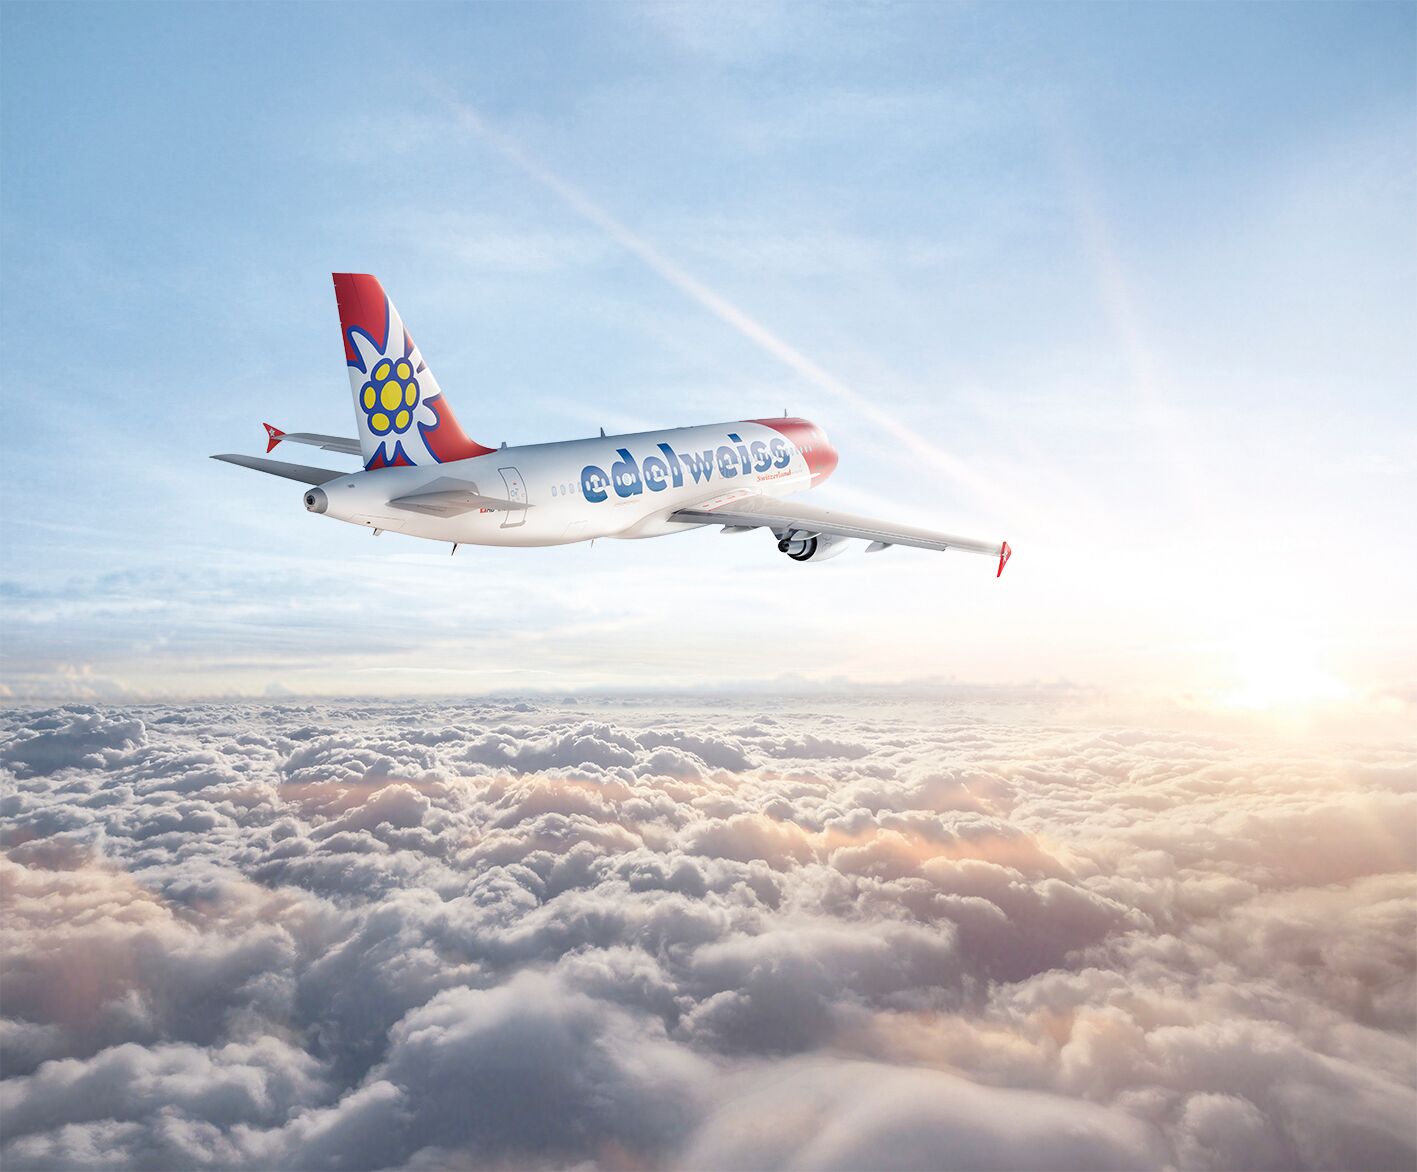 edelweiss air swiss airline flights switzerland flug nach routes ferien airport tag a320 north cancun role give cancún fly iframe